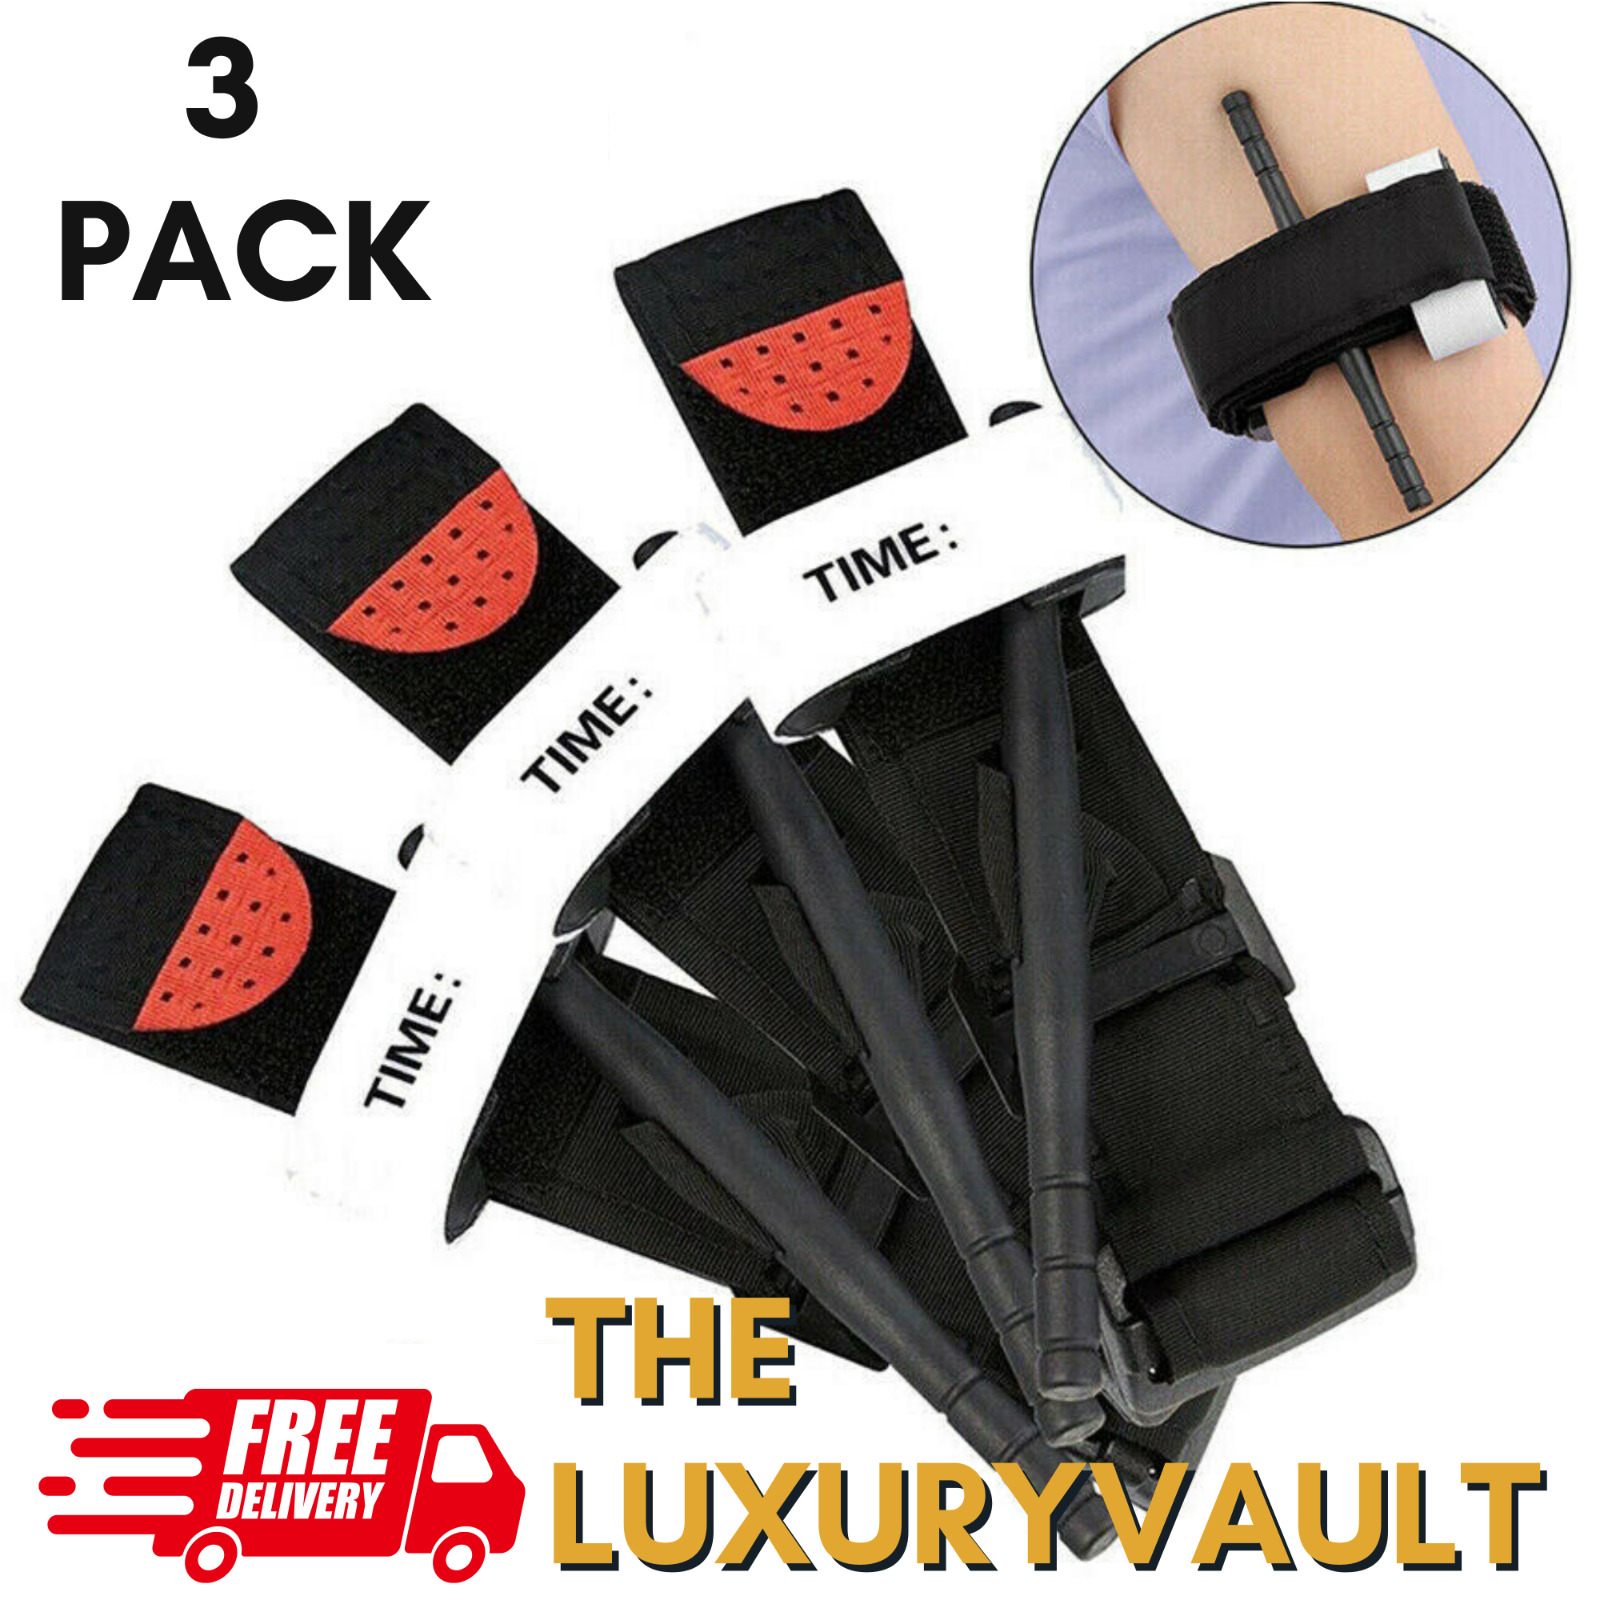 3 pcs Tourniquet Rapid One Hand Application Emergency Outdoor First Aid Kit USA